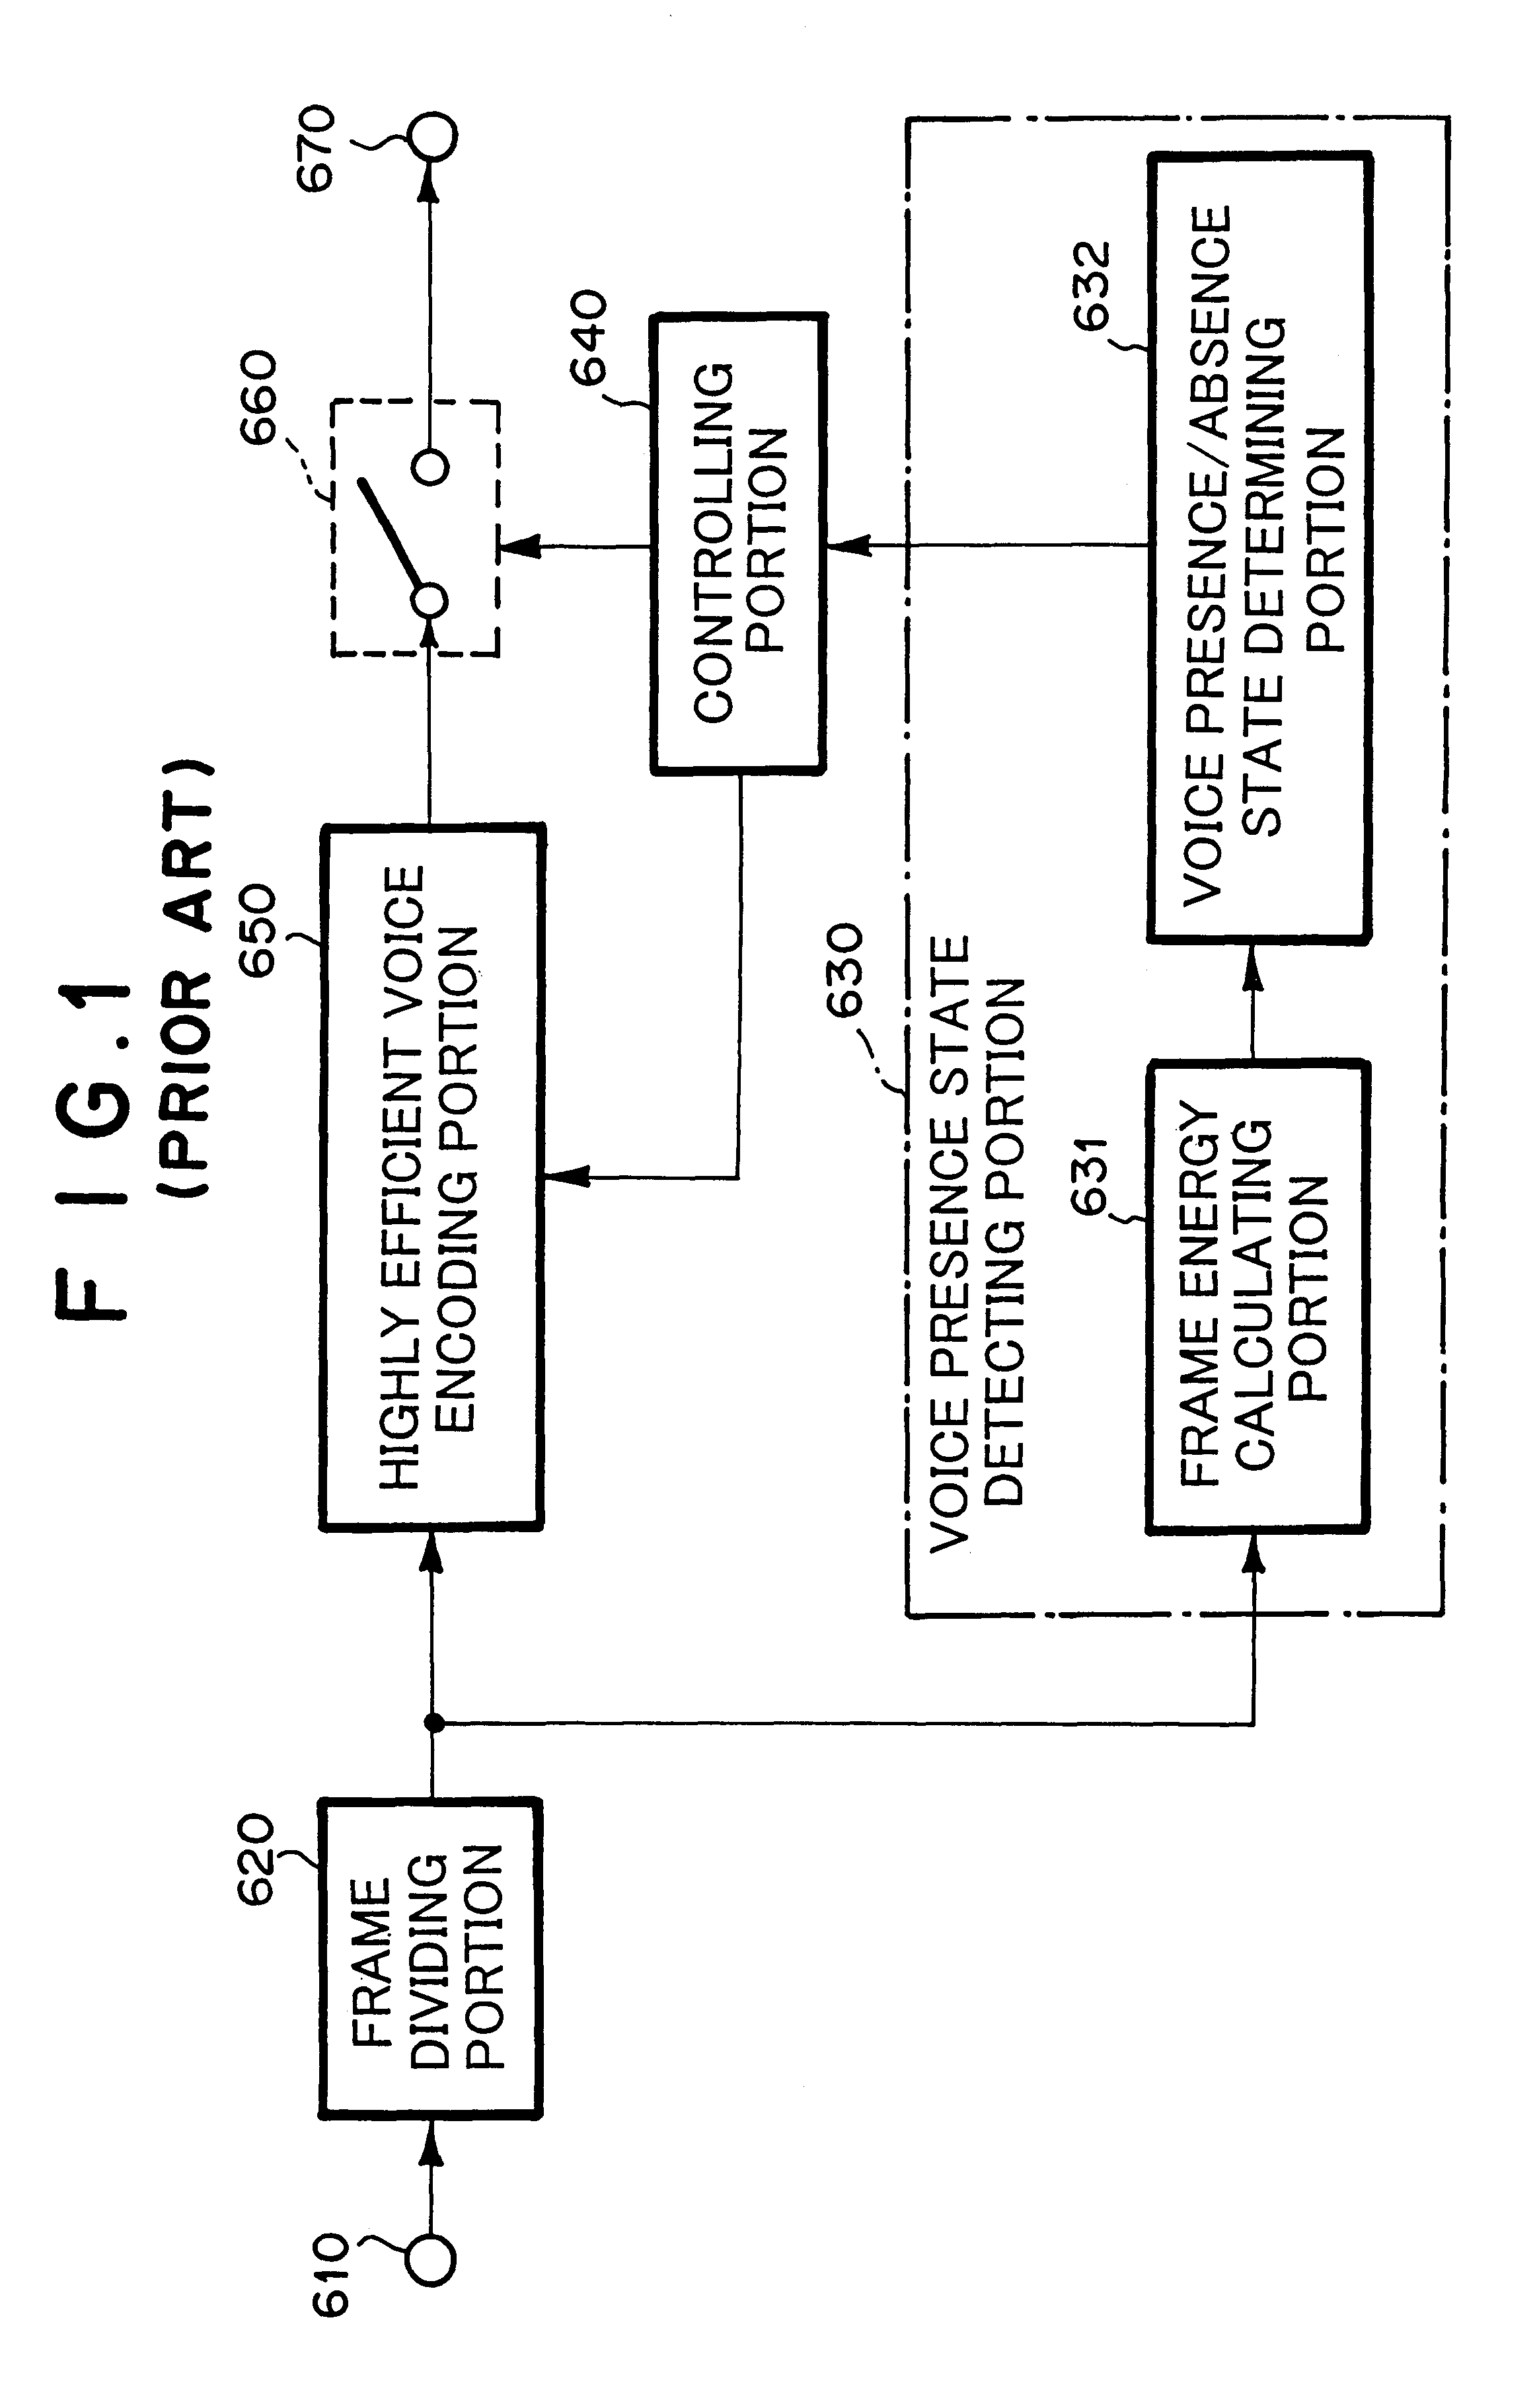 Voice activity detection using the degree of energy variation among multiple adjacent pairs of subframes